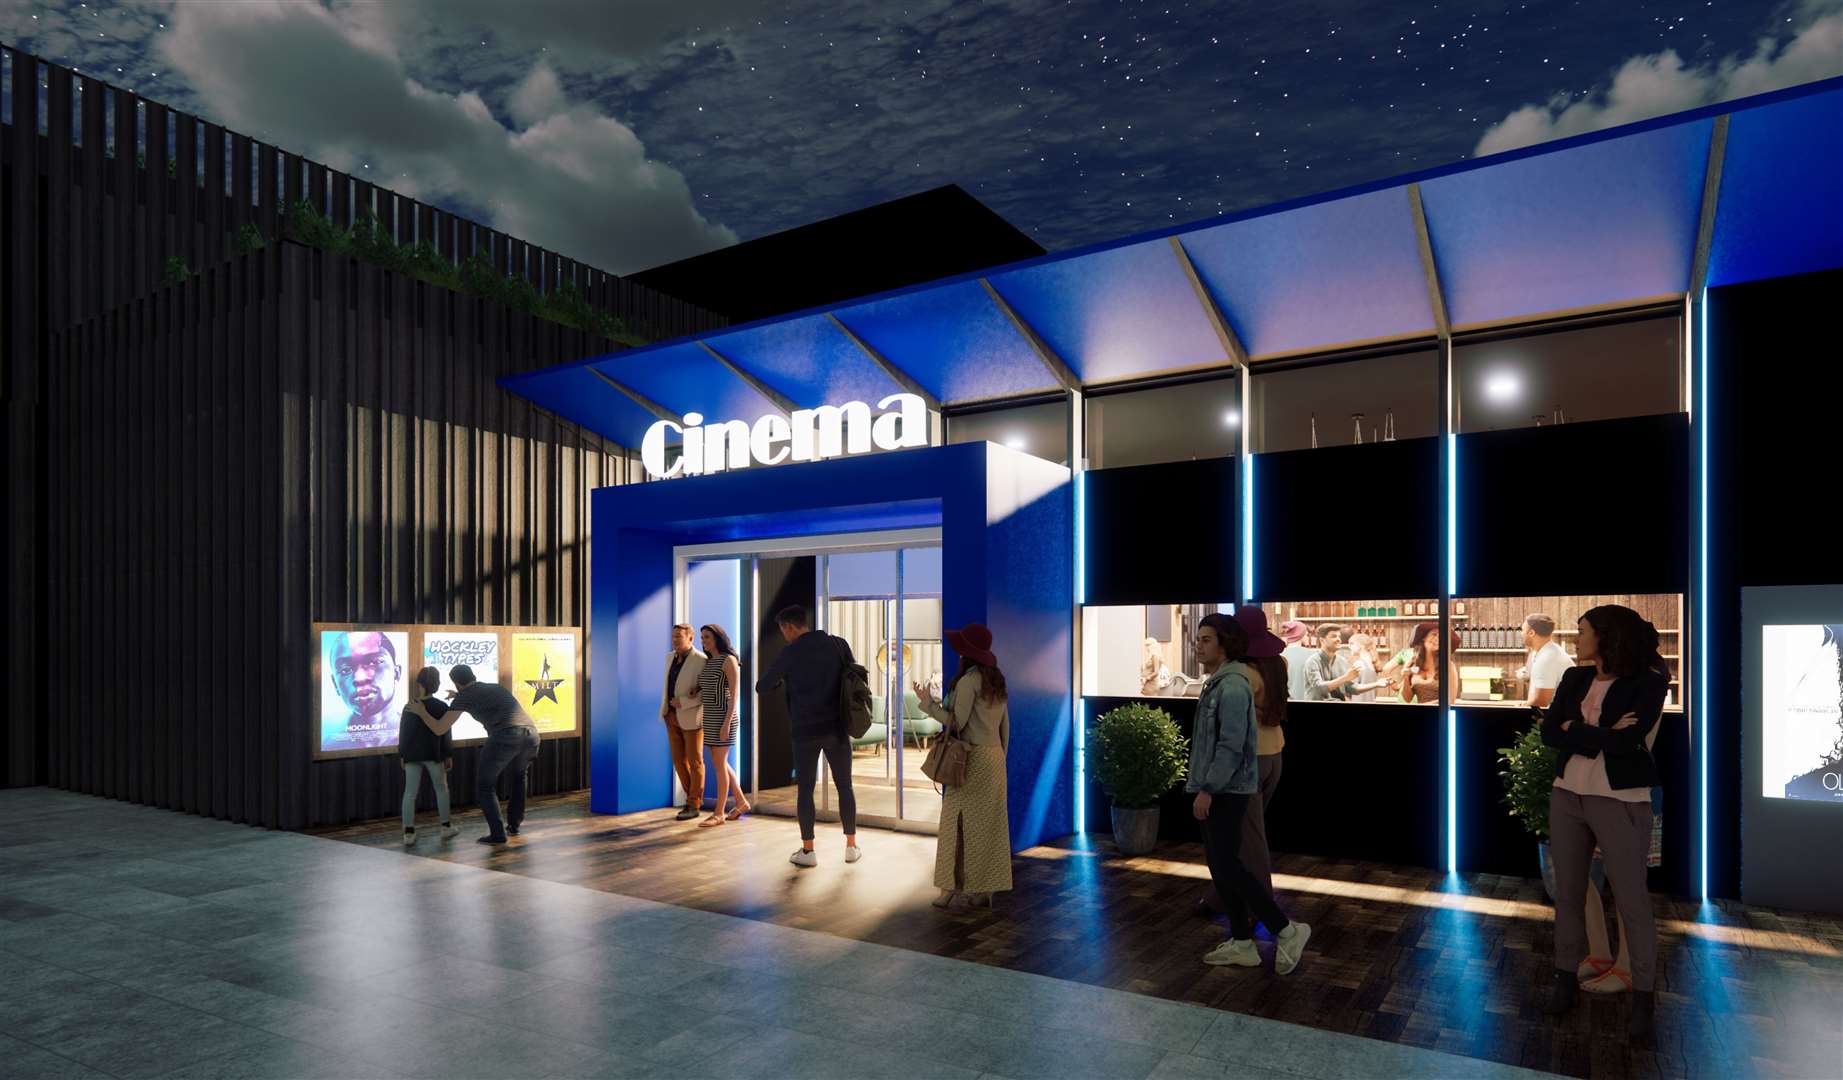 How the cinema could have looked according to Tenterden Cinema Ltd